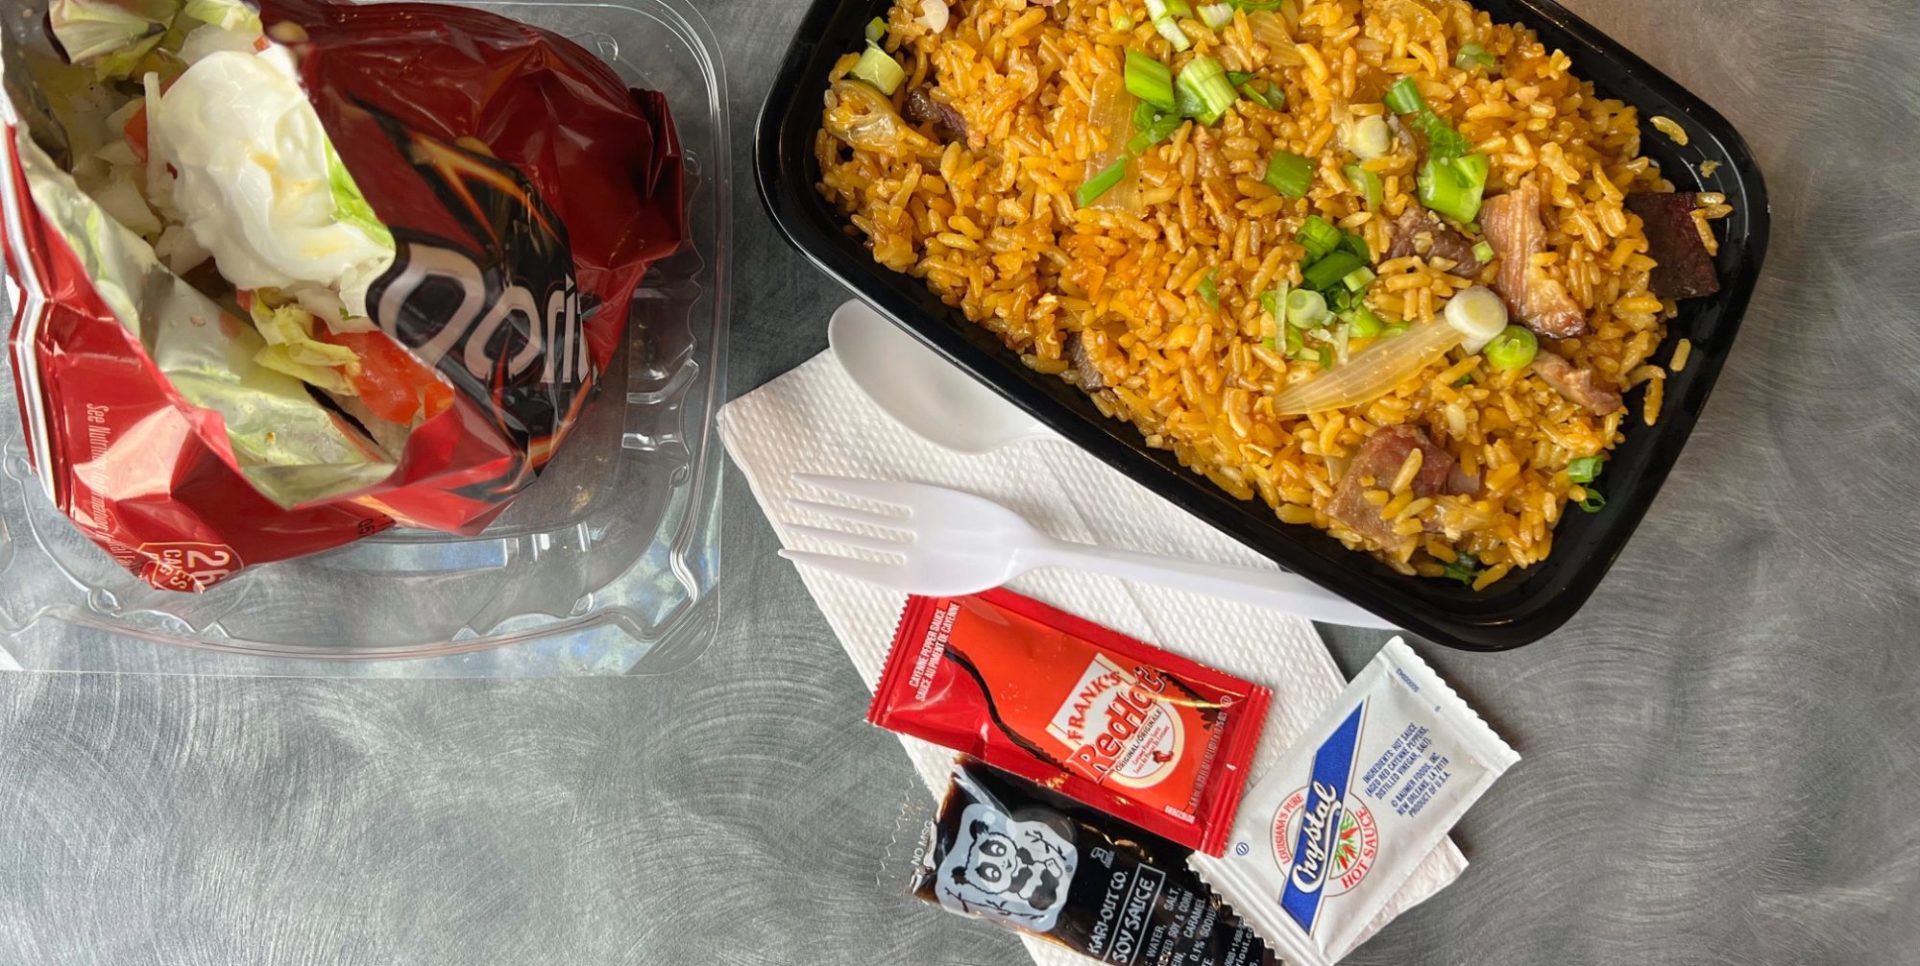 A Doritos bag has sour cream and taco ingredients beside a black container of fried rice topped with green onions. Beside both is a white paper napkin, white plastic fork and spoon, Frank's hot sauce, Crystal hot sauce, and soy sauce packet.